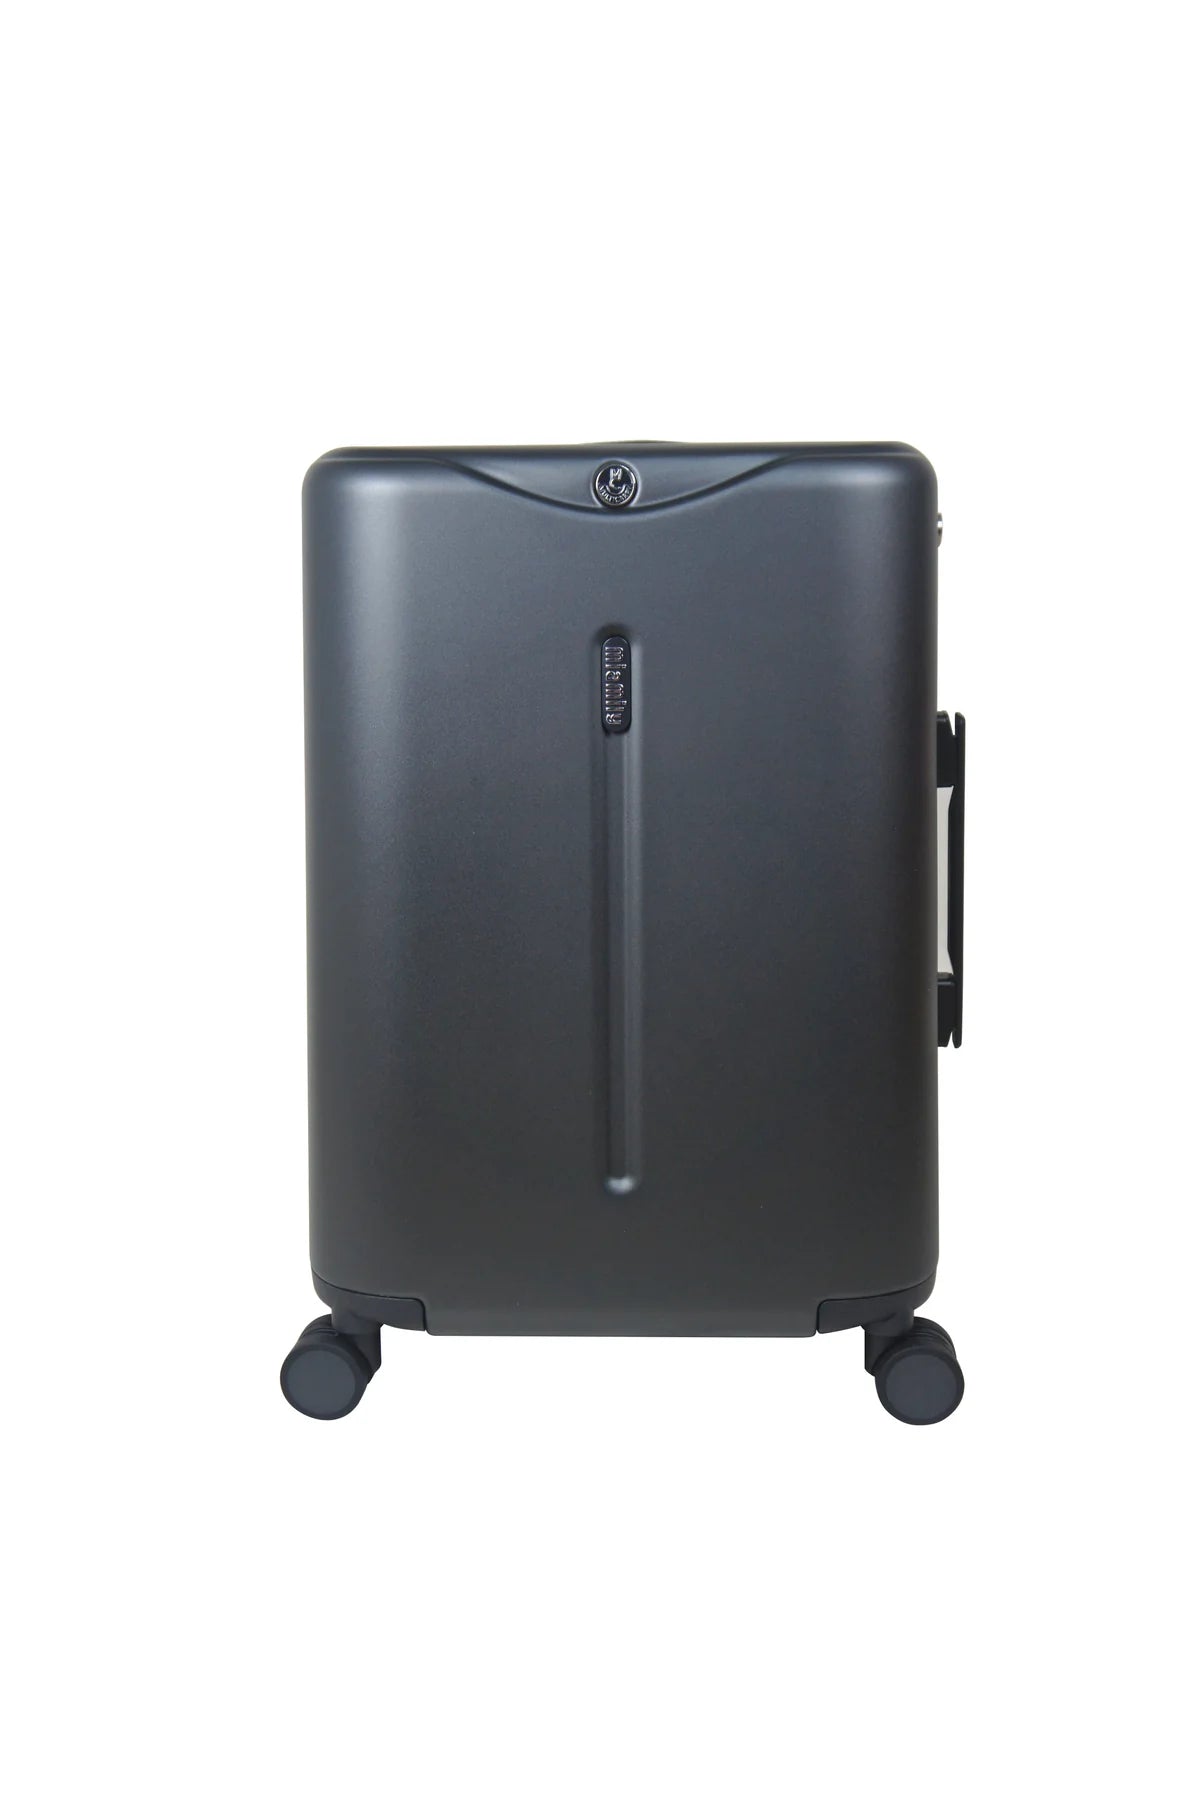 Miamily MultiCarry Ride-On Luggage 18" - Midnight Black (PRE-ORDER END JUNE ARRIVAL)